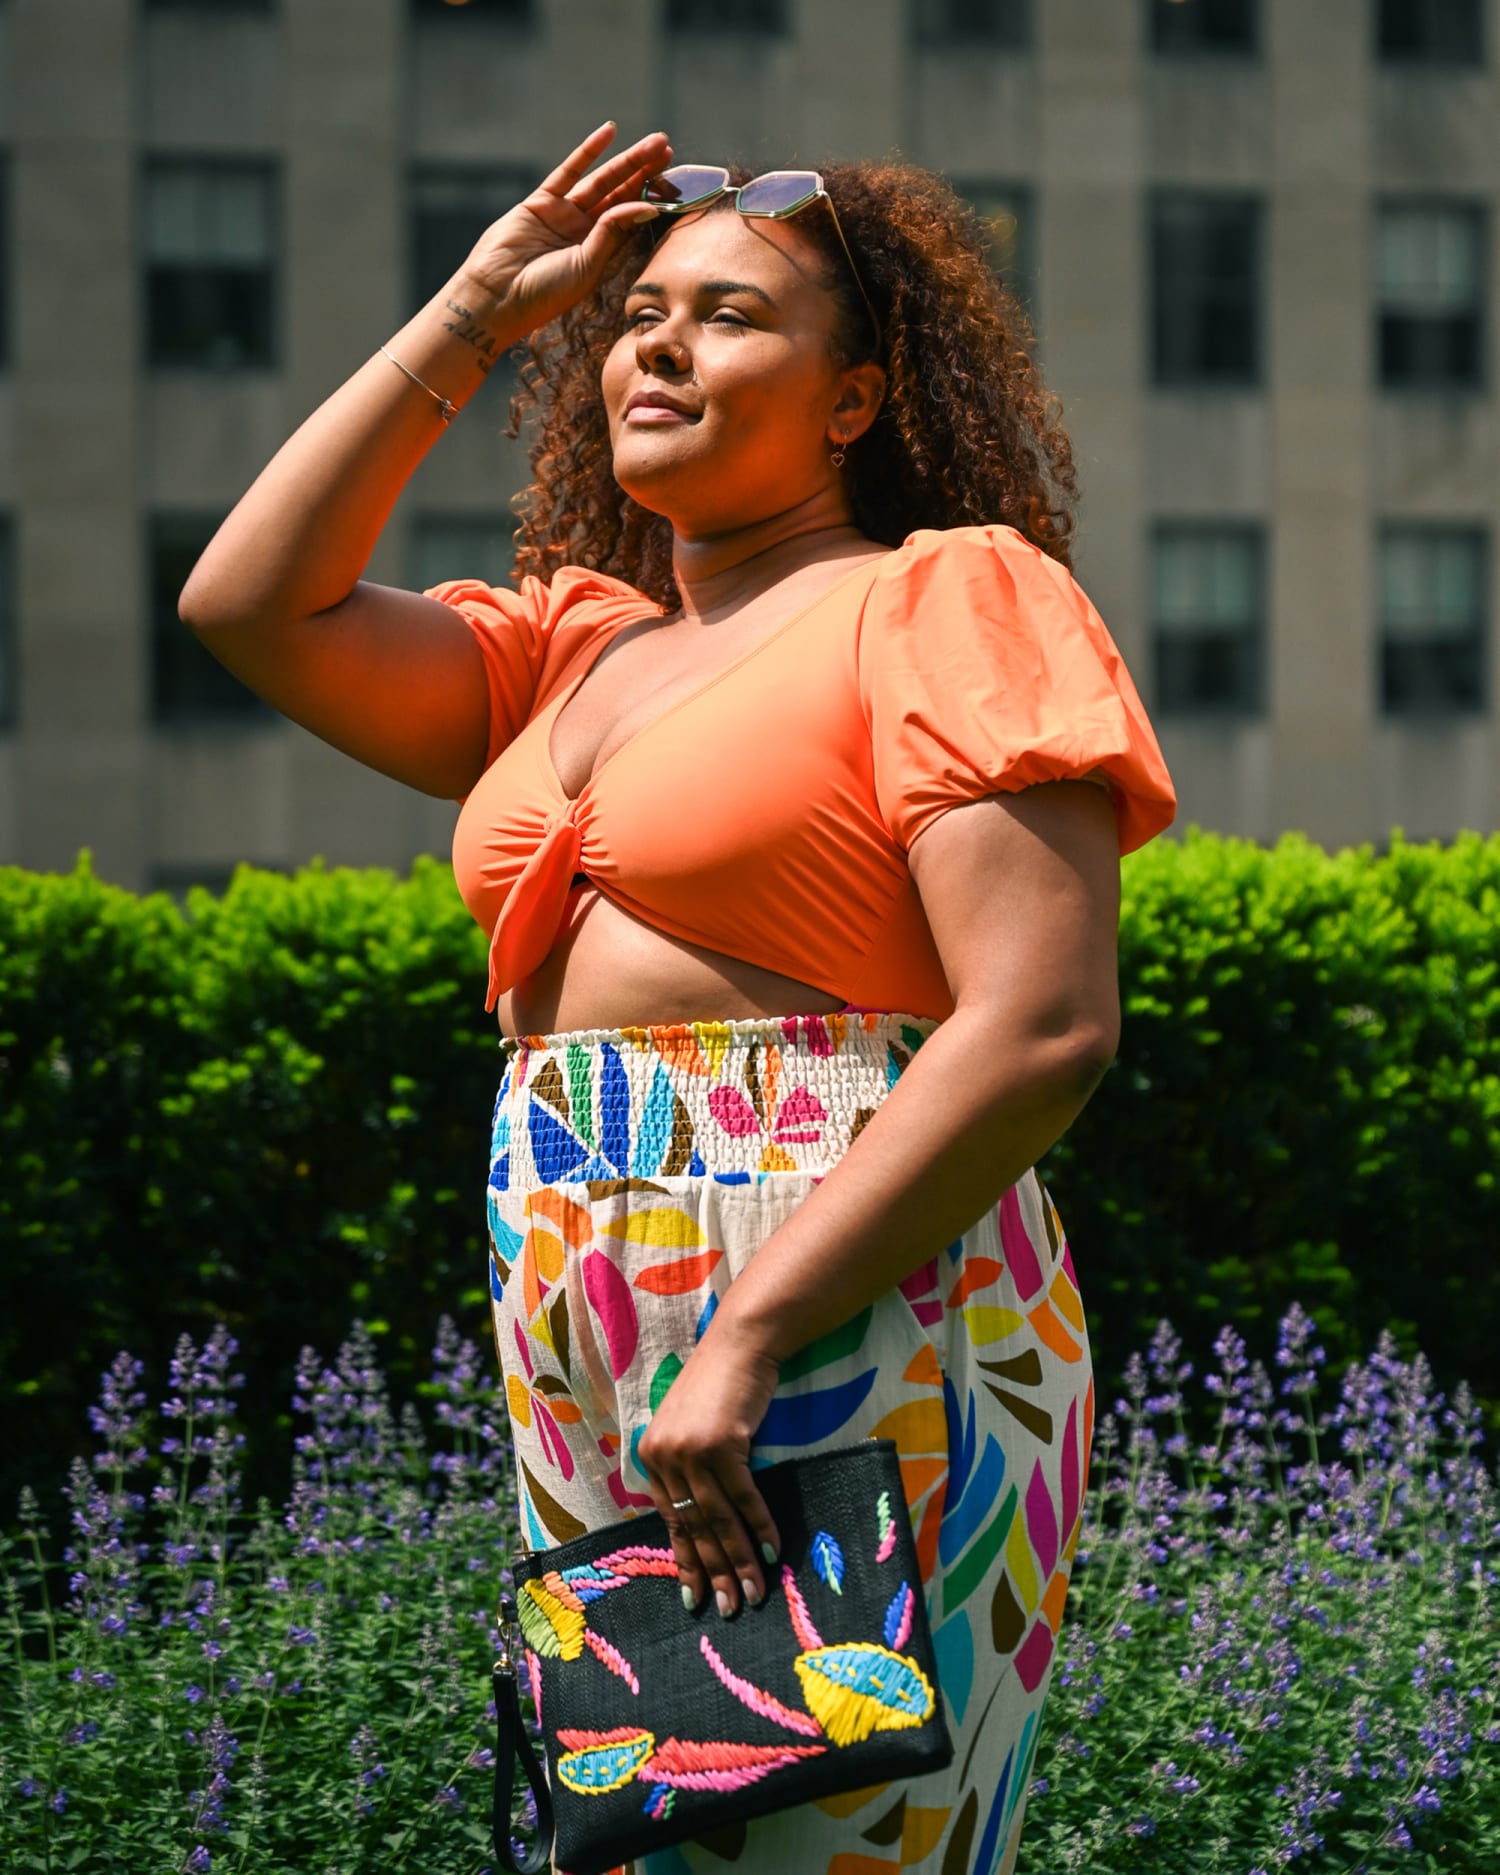 Tabitha Brown is on the rise with new brand deals - Brand&Culture